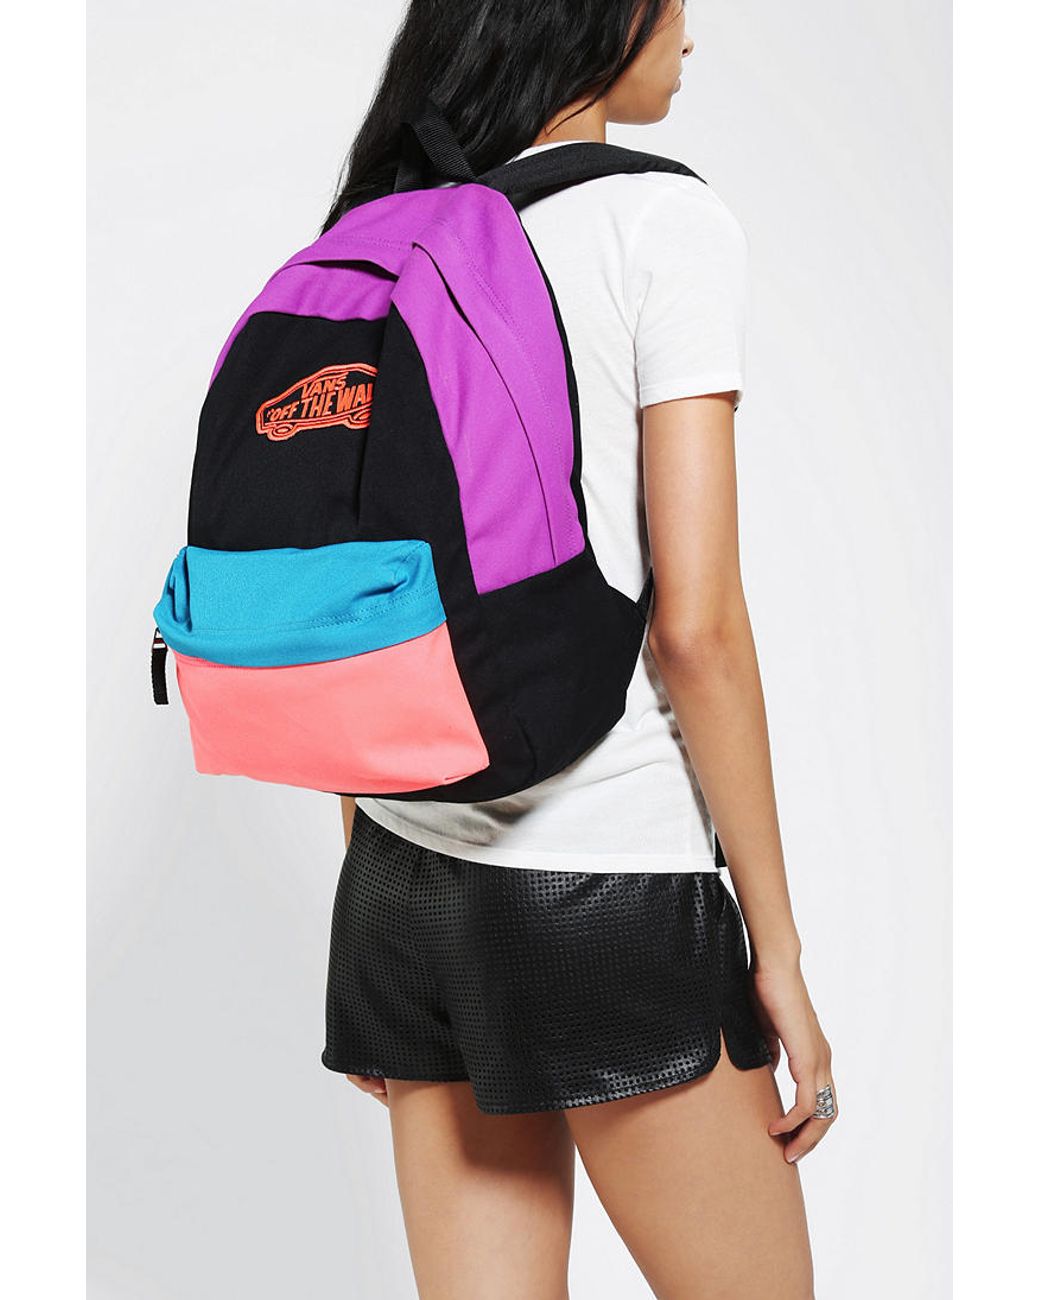 Urban Outfitters Vans Realm Colorblock Backpack for Men | Lyst